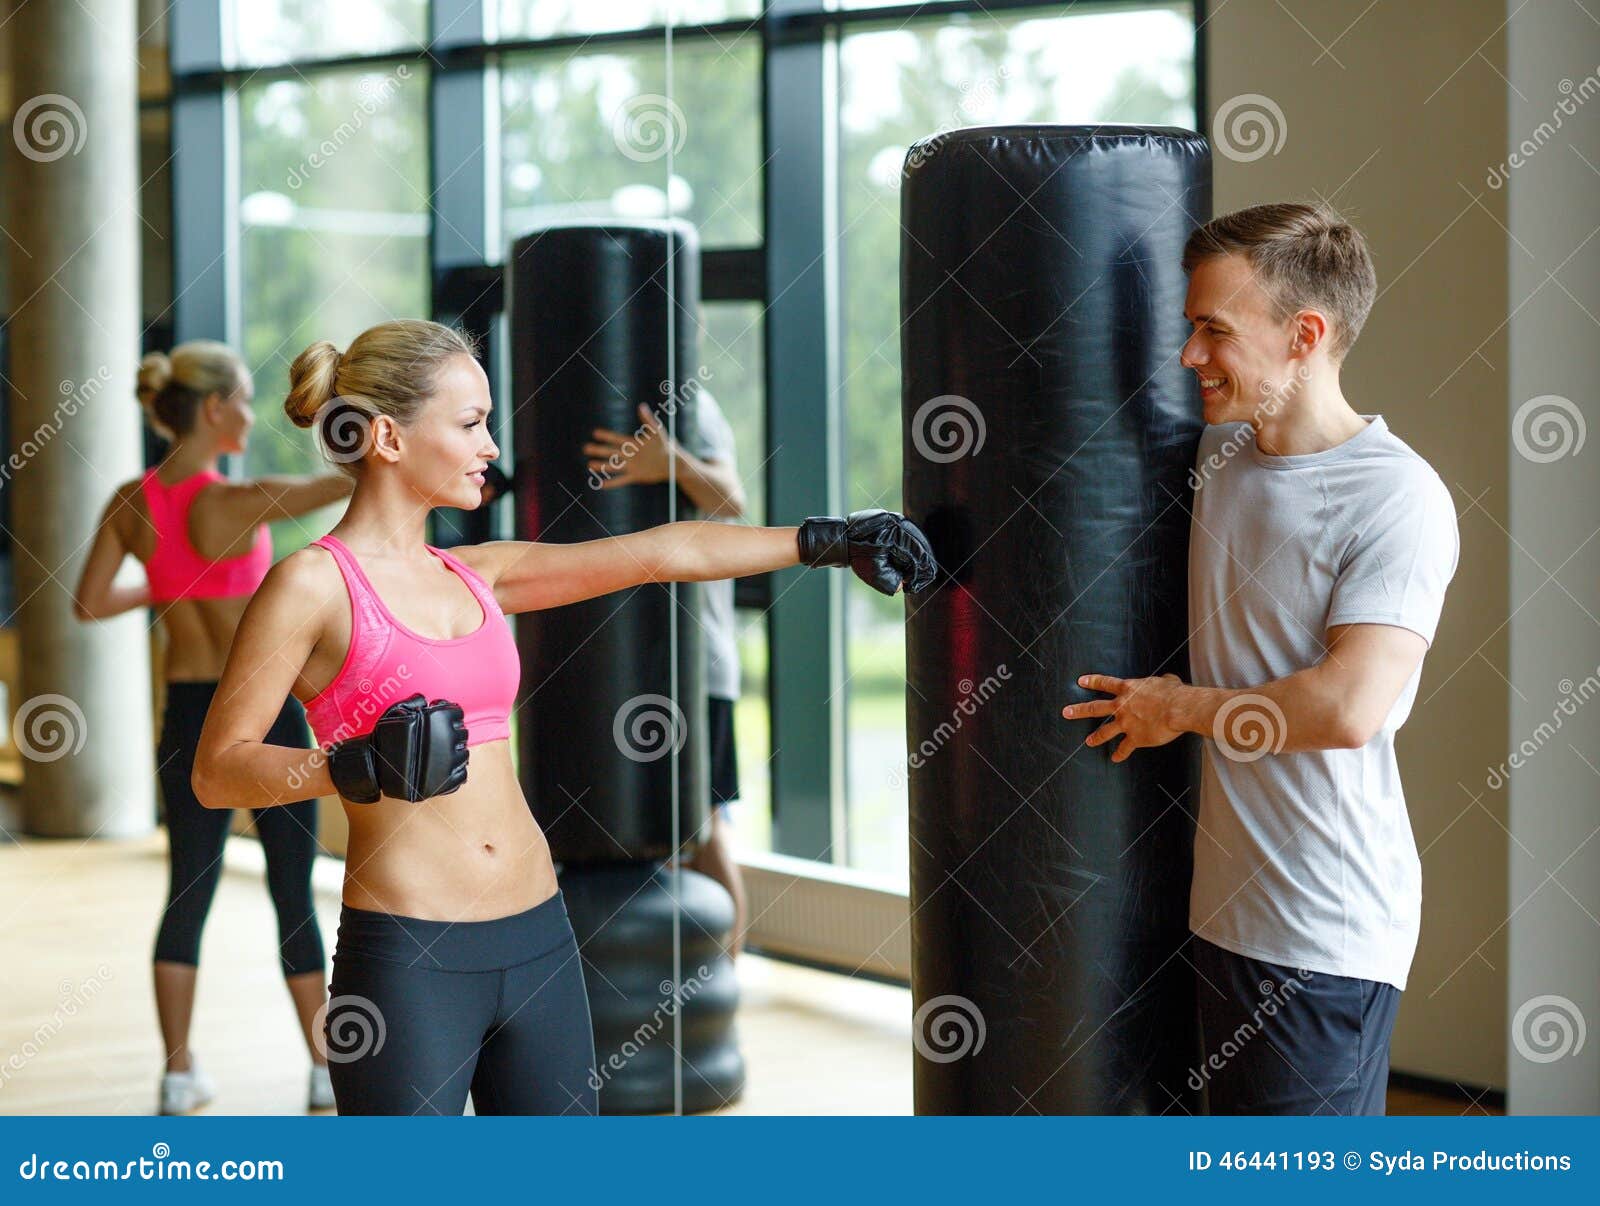 Smiling Woman With Personal Trainer Boxing In Gym Stock